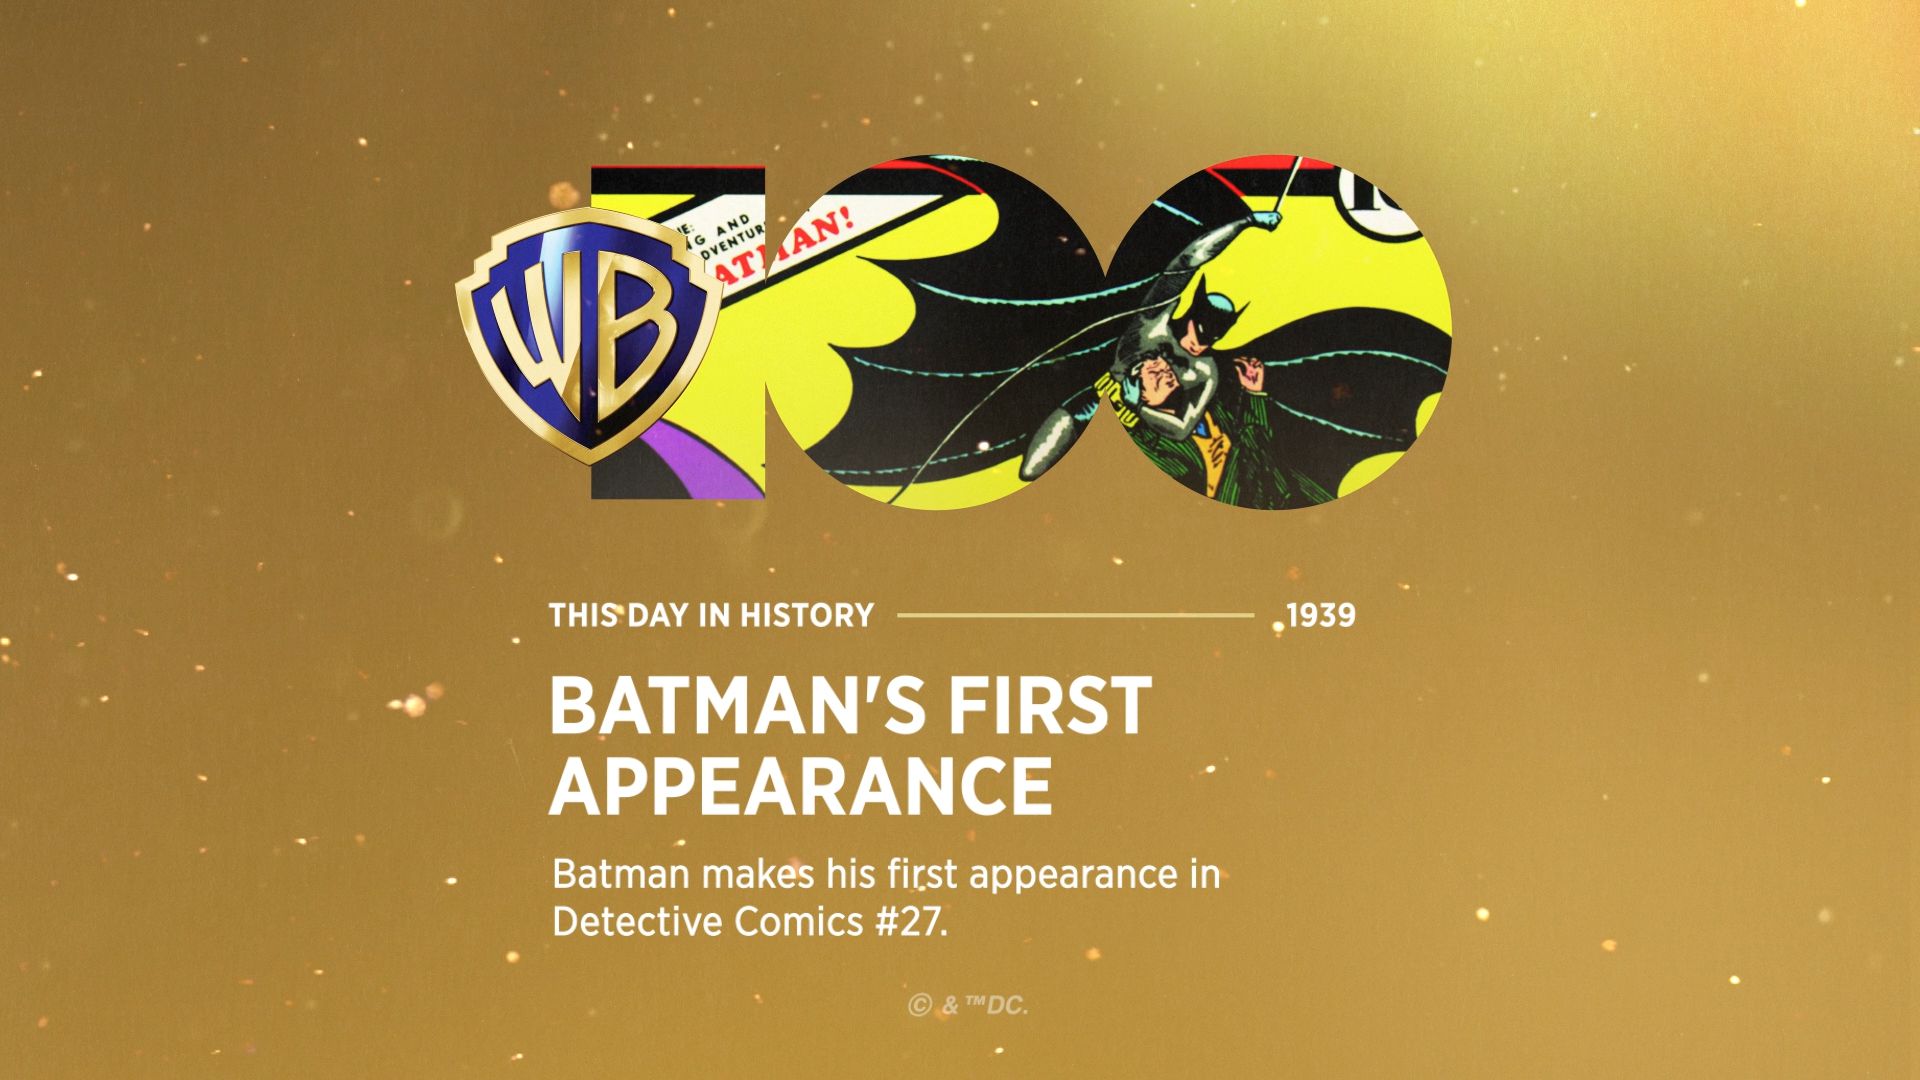 WB100: This Day in History: Batman's First Appearance